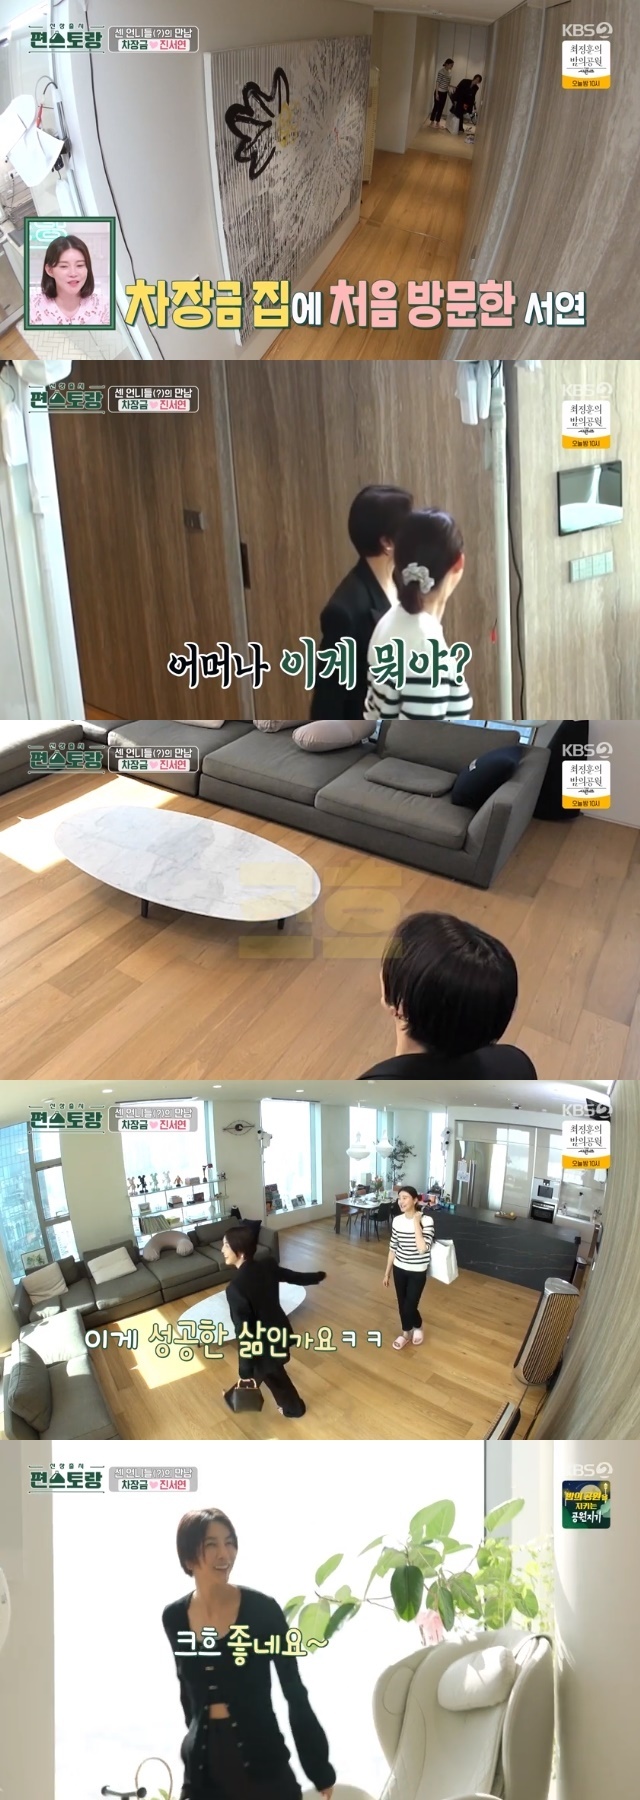 Jin Seo-yeon admires Cha Ye-ryun Ju Sang Wook couples house viewIn the 181st episode of KBS 2TVs entertainment show Stars Top Recipe at Fun-Staurant (hereinafter referred to as Stars Top Recipe at Fun-Staurant), which aired on June 23, Cha Ye-ryun invited actor Jin Seo-yeon to his home.On this day, Jin Seo-yeon appeared in the house of Cha Ye-ryun, spreading the Sensei Force.In the appearance of Jin Seo-yeon walking like a runway, Boom responded, I invited you, but when you come here, Im too scared to lock the door again.As soon as Jin Seo-yeon first entered Cha Ye-ryuns house, she was surprised and said, This is the taste of wealth. Is this a successful life?Jin Seo-yeon praised Cha Ye-ryuns house view as a view frenzy.